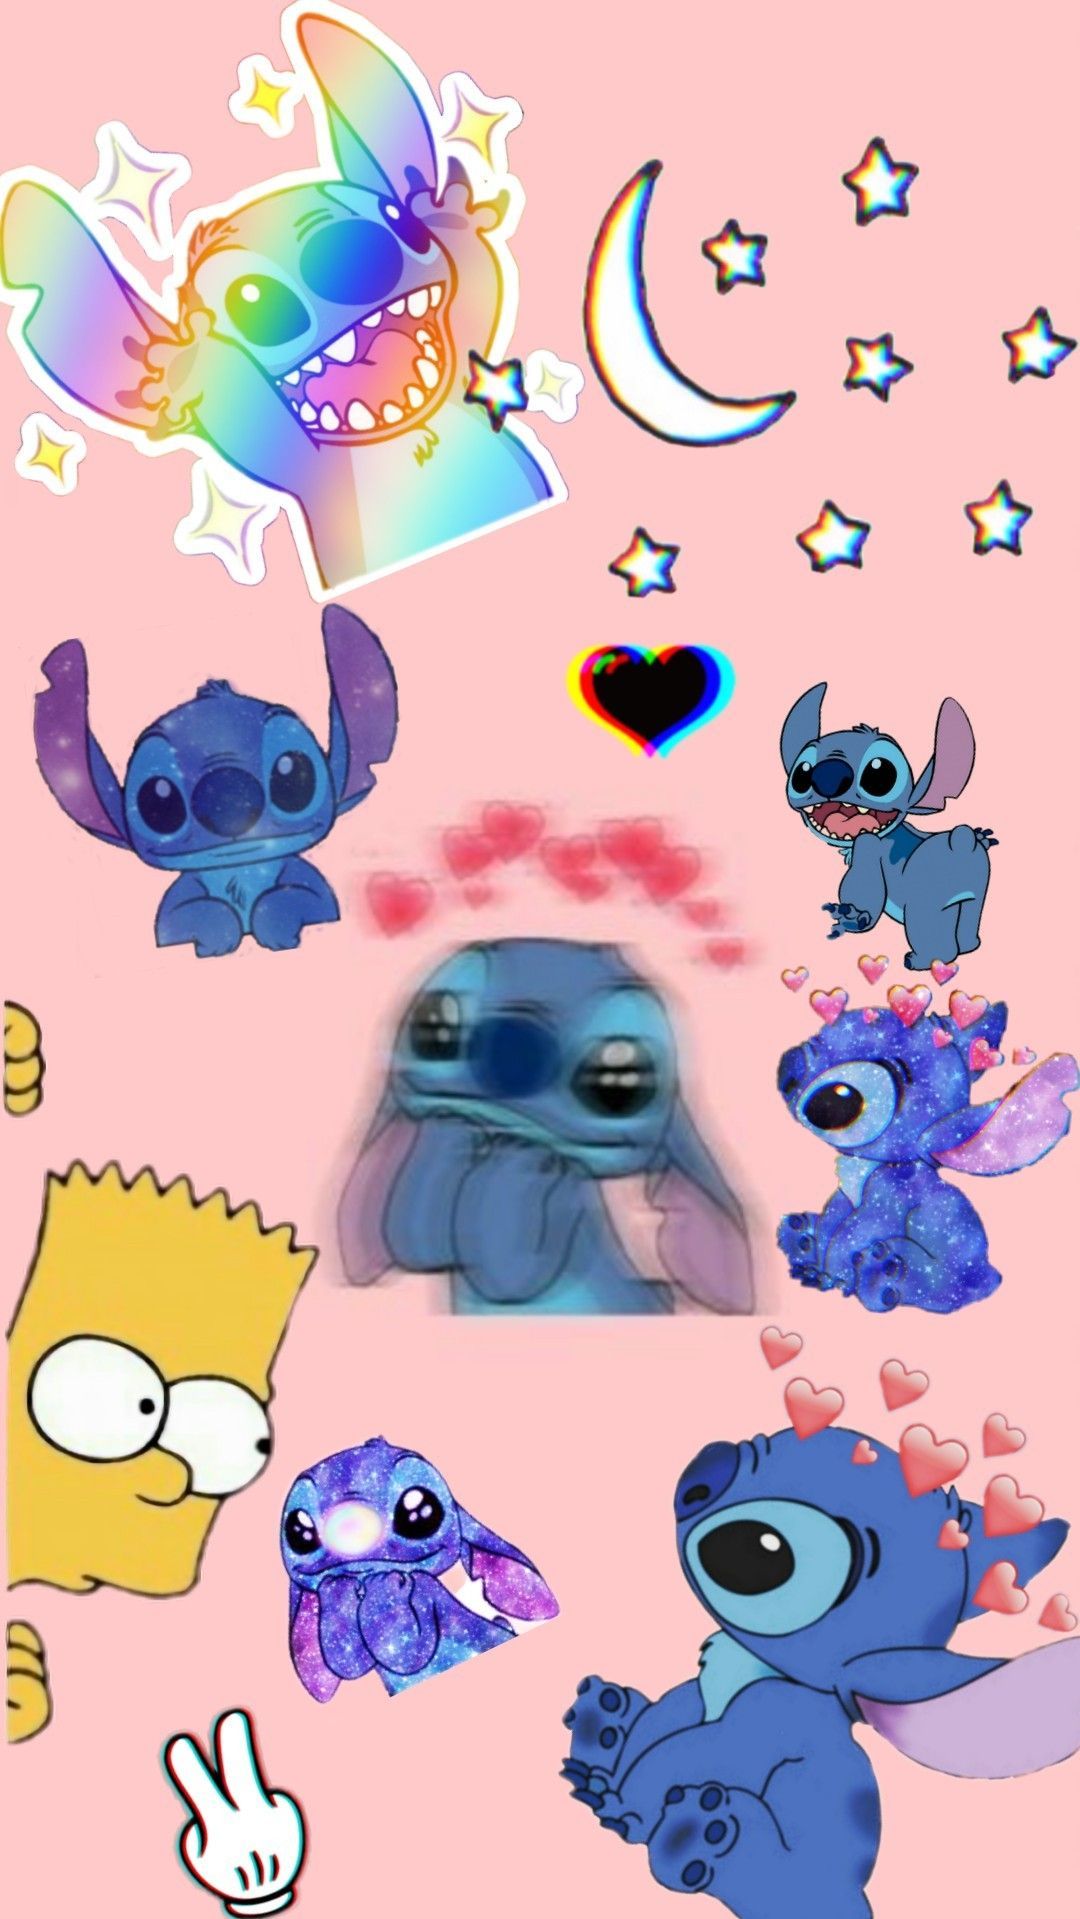 STITCH 4 EVER. Cartoon wallpaper iphone, Cute patterns wallpaper, Disney characters. Lilo and stitch drawings, Cute stitch, Stitch drawing